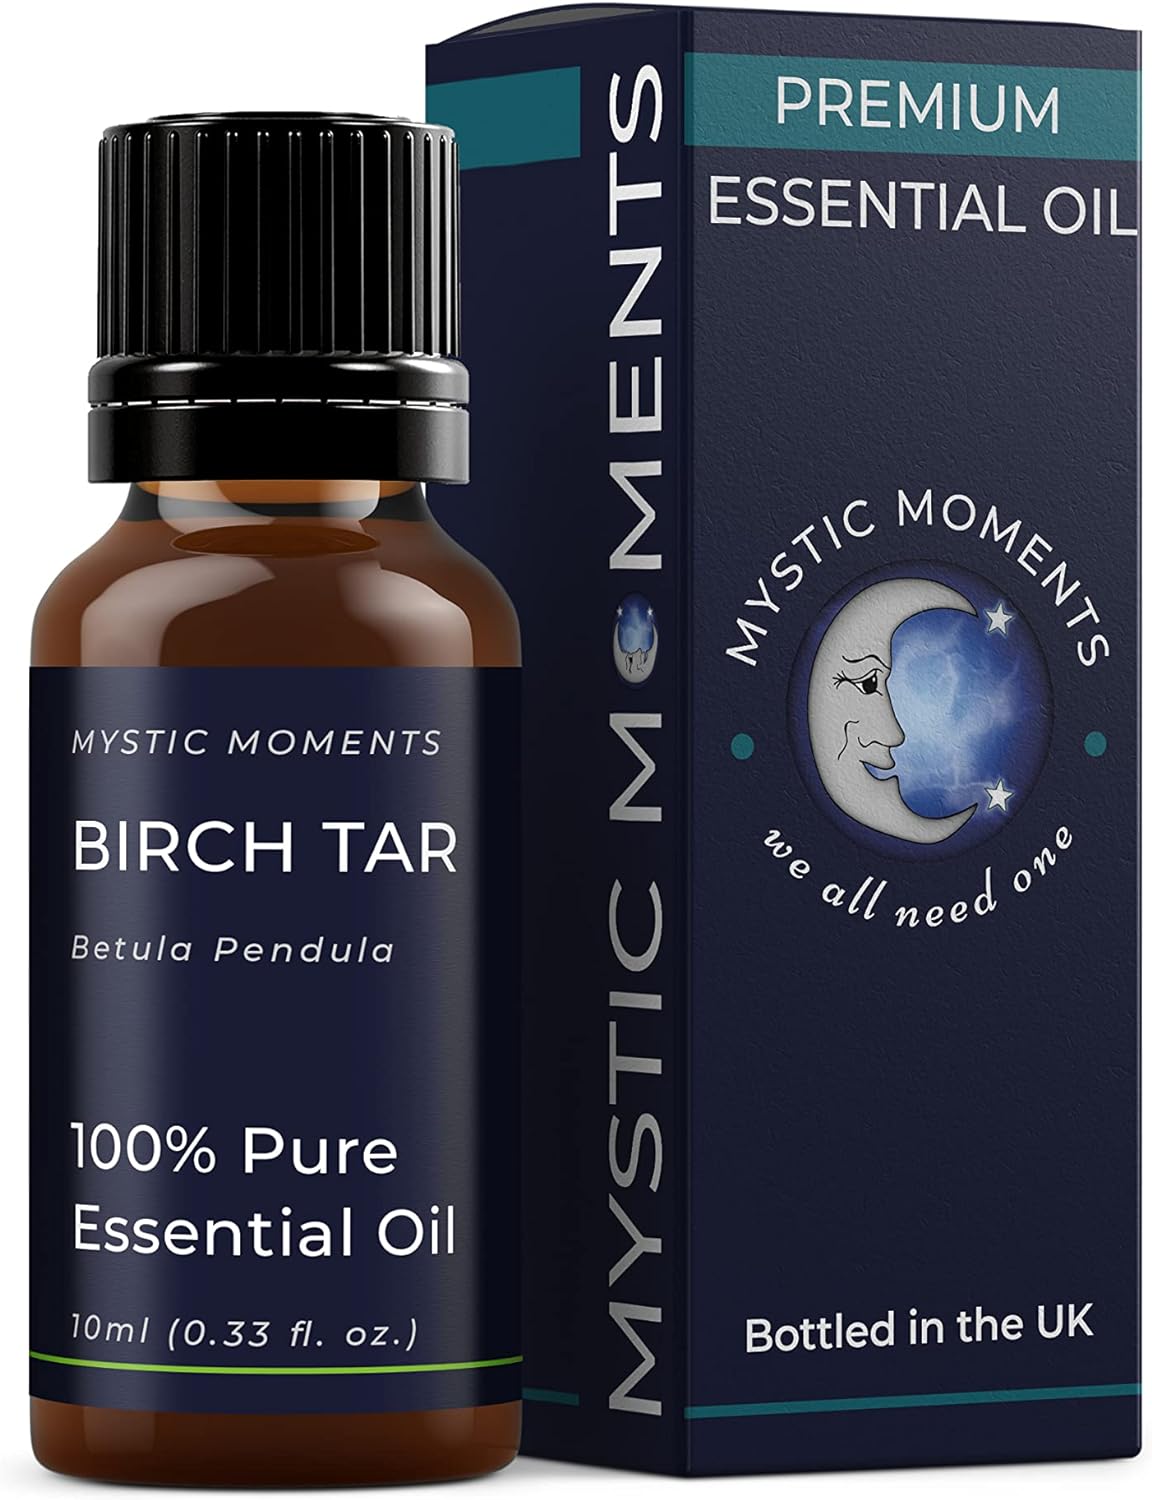 Mystic Moments | Birch Tar Essential Oil 10ml - Pure & Natural oil for Diffusers, Aromatherapy & Massage Blends Vegan GMO Free